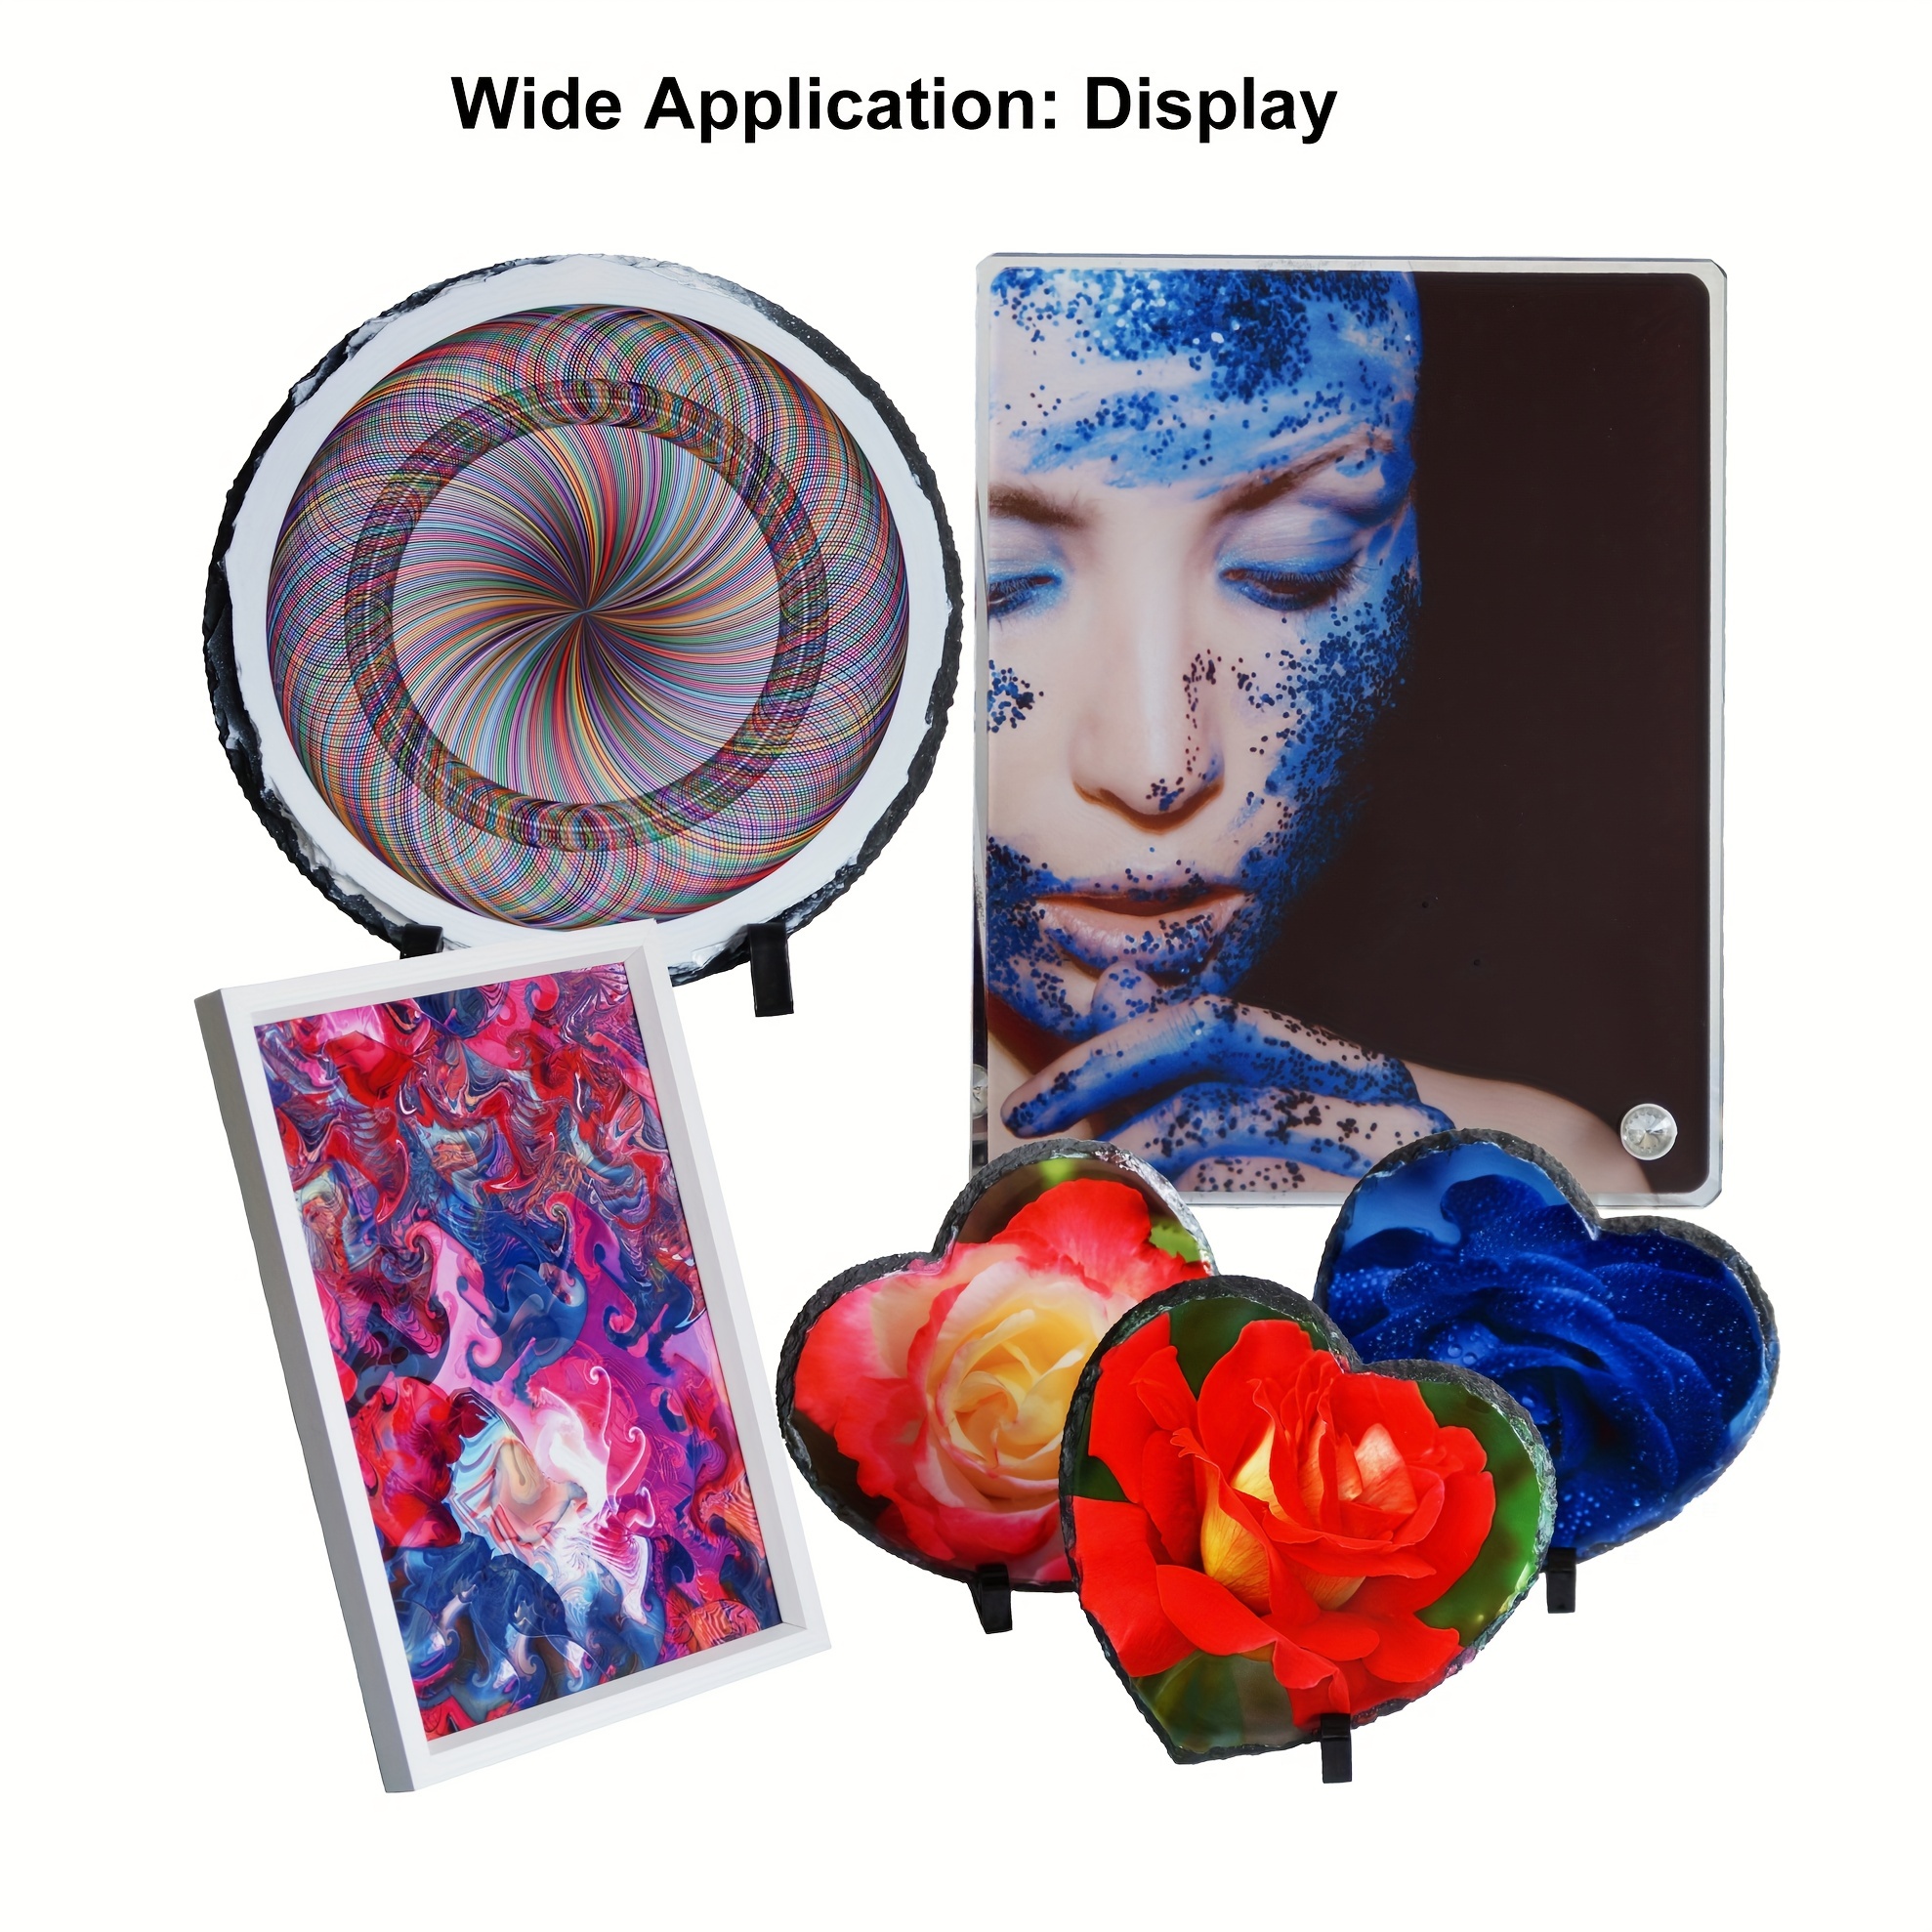 A-SUB Sublimation Paper Heat Transfer 110 Sheets 8.5 x 14 Inches Legal Size  Compatible with Inkjet Printer 120gsm